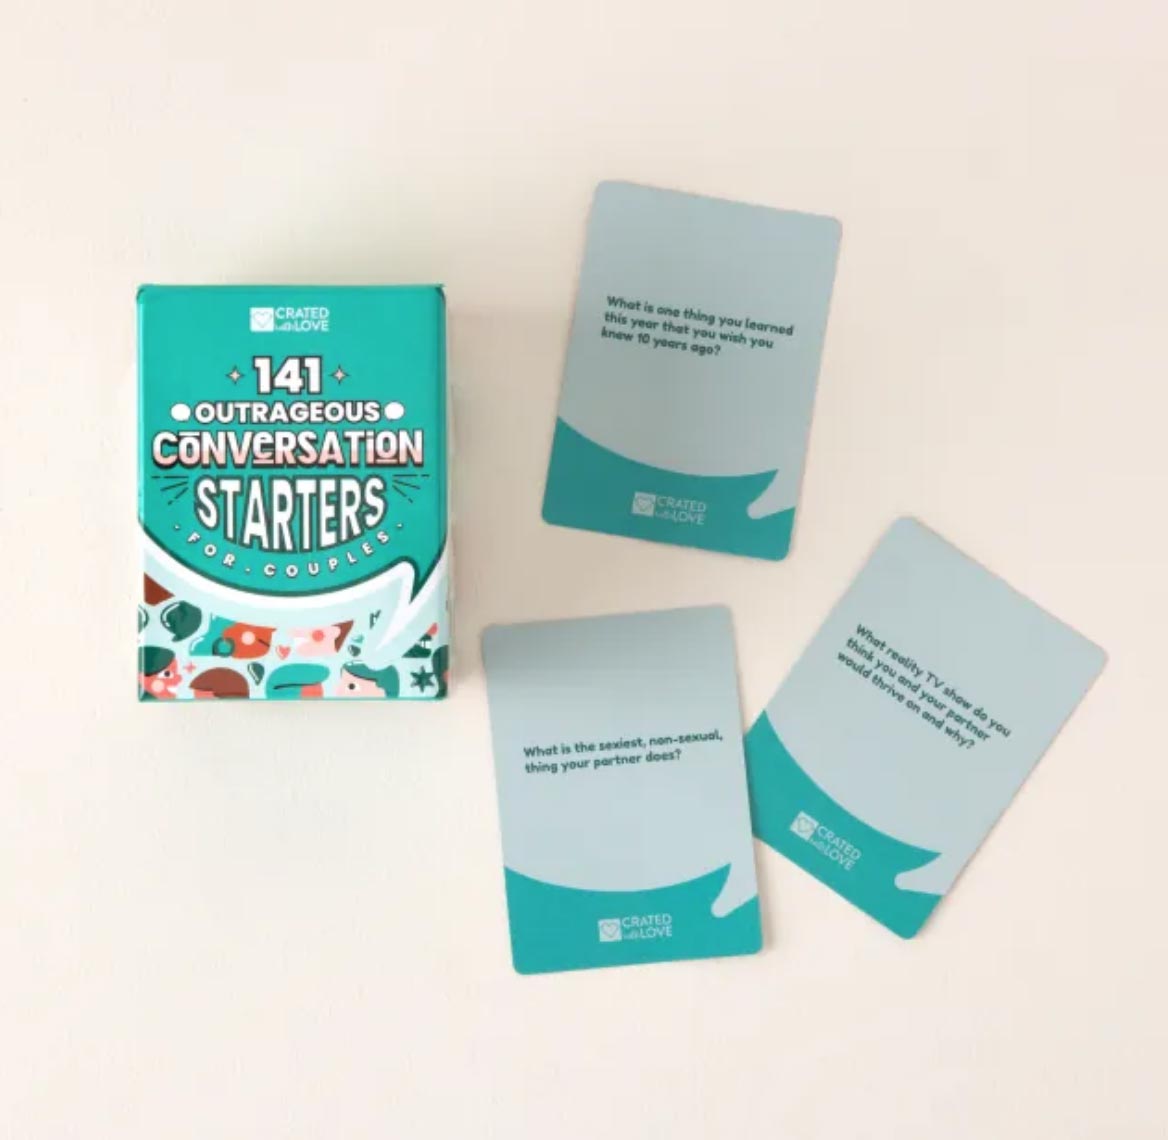 Outrageous Conversation Starters for Couples by Uncommon Goods